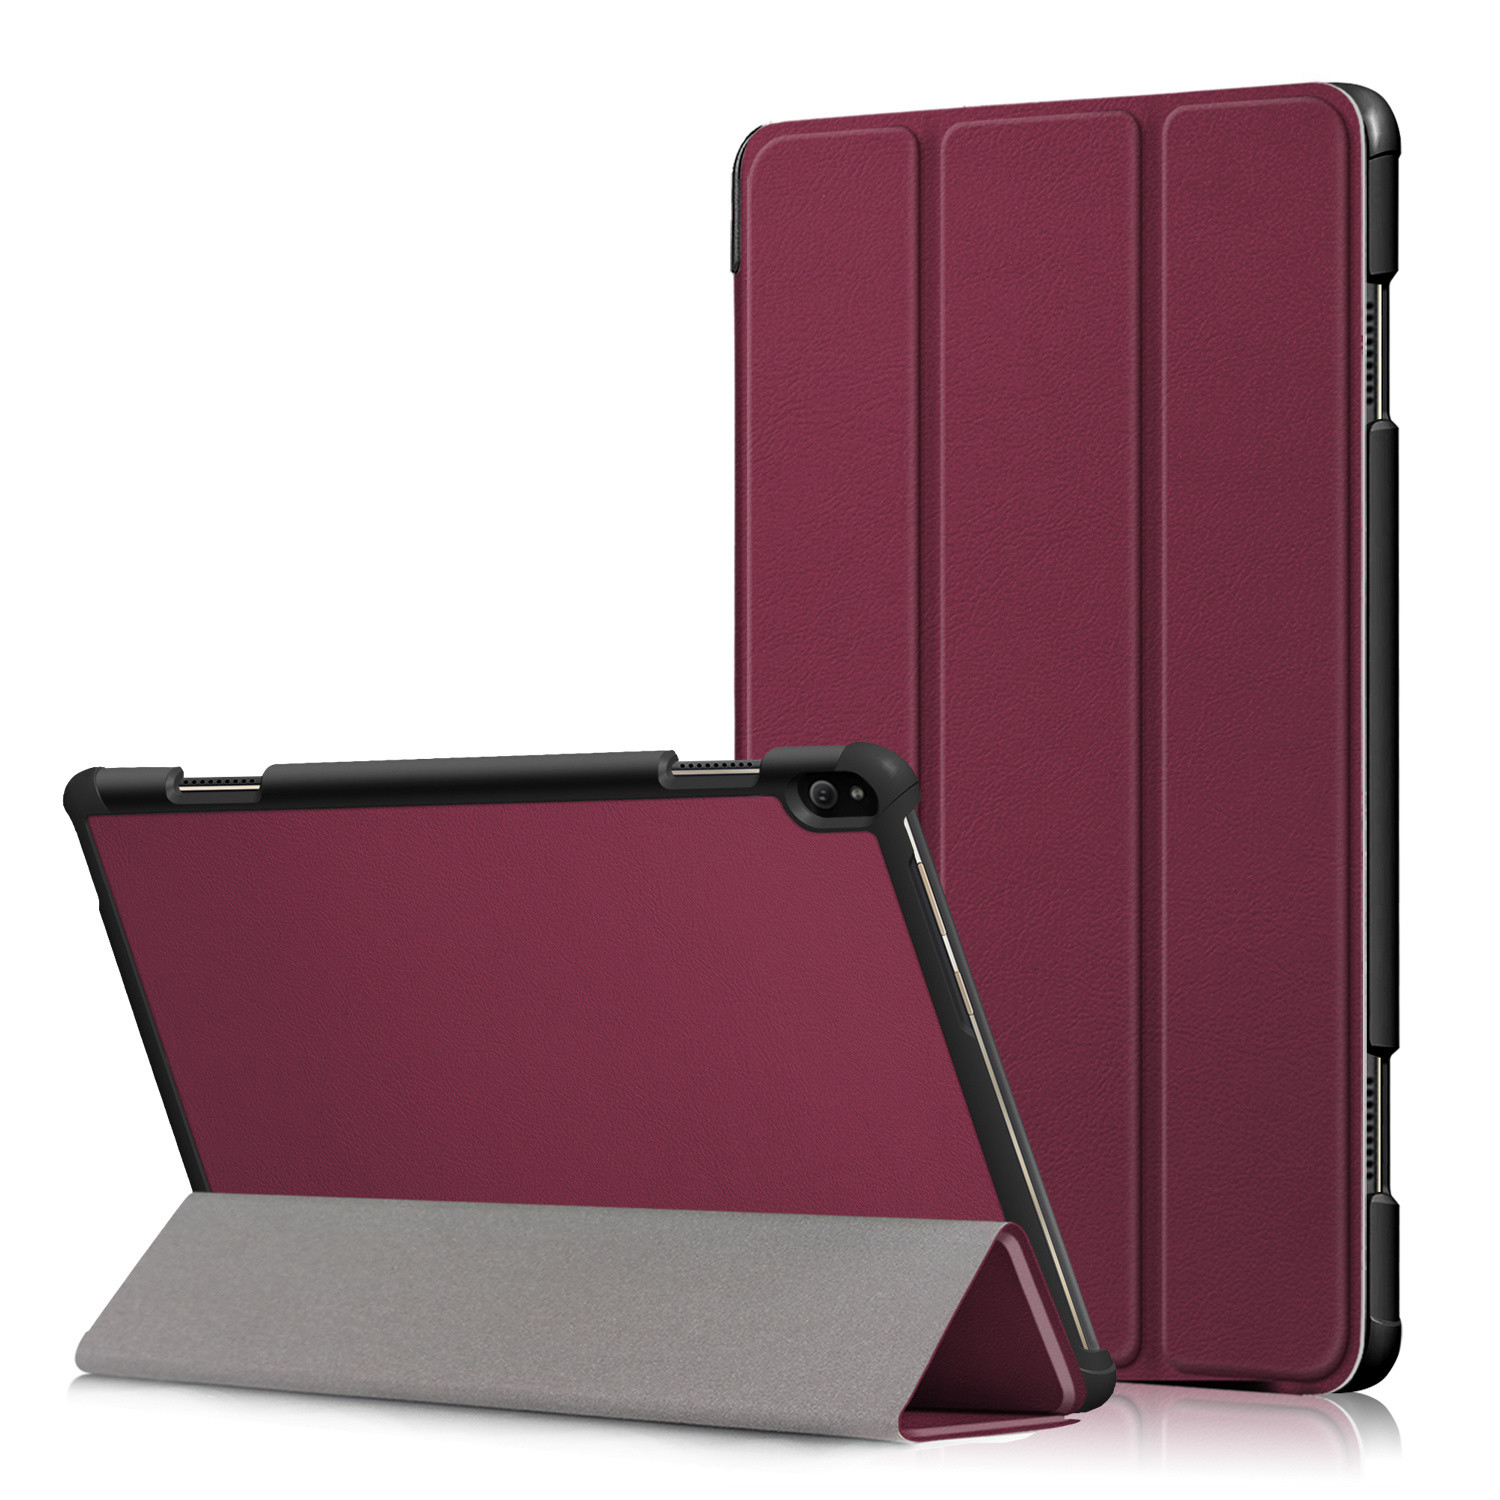 3-Vouw sleepcover hoes - Lenovo Tab P10 - Bordeaux Rood